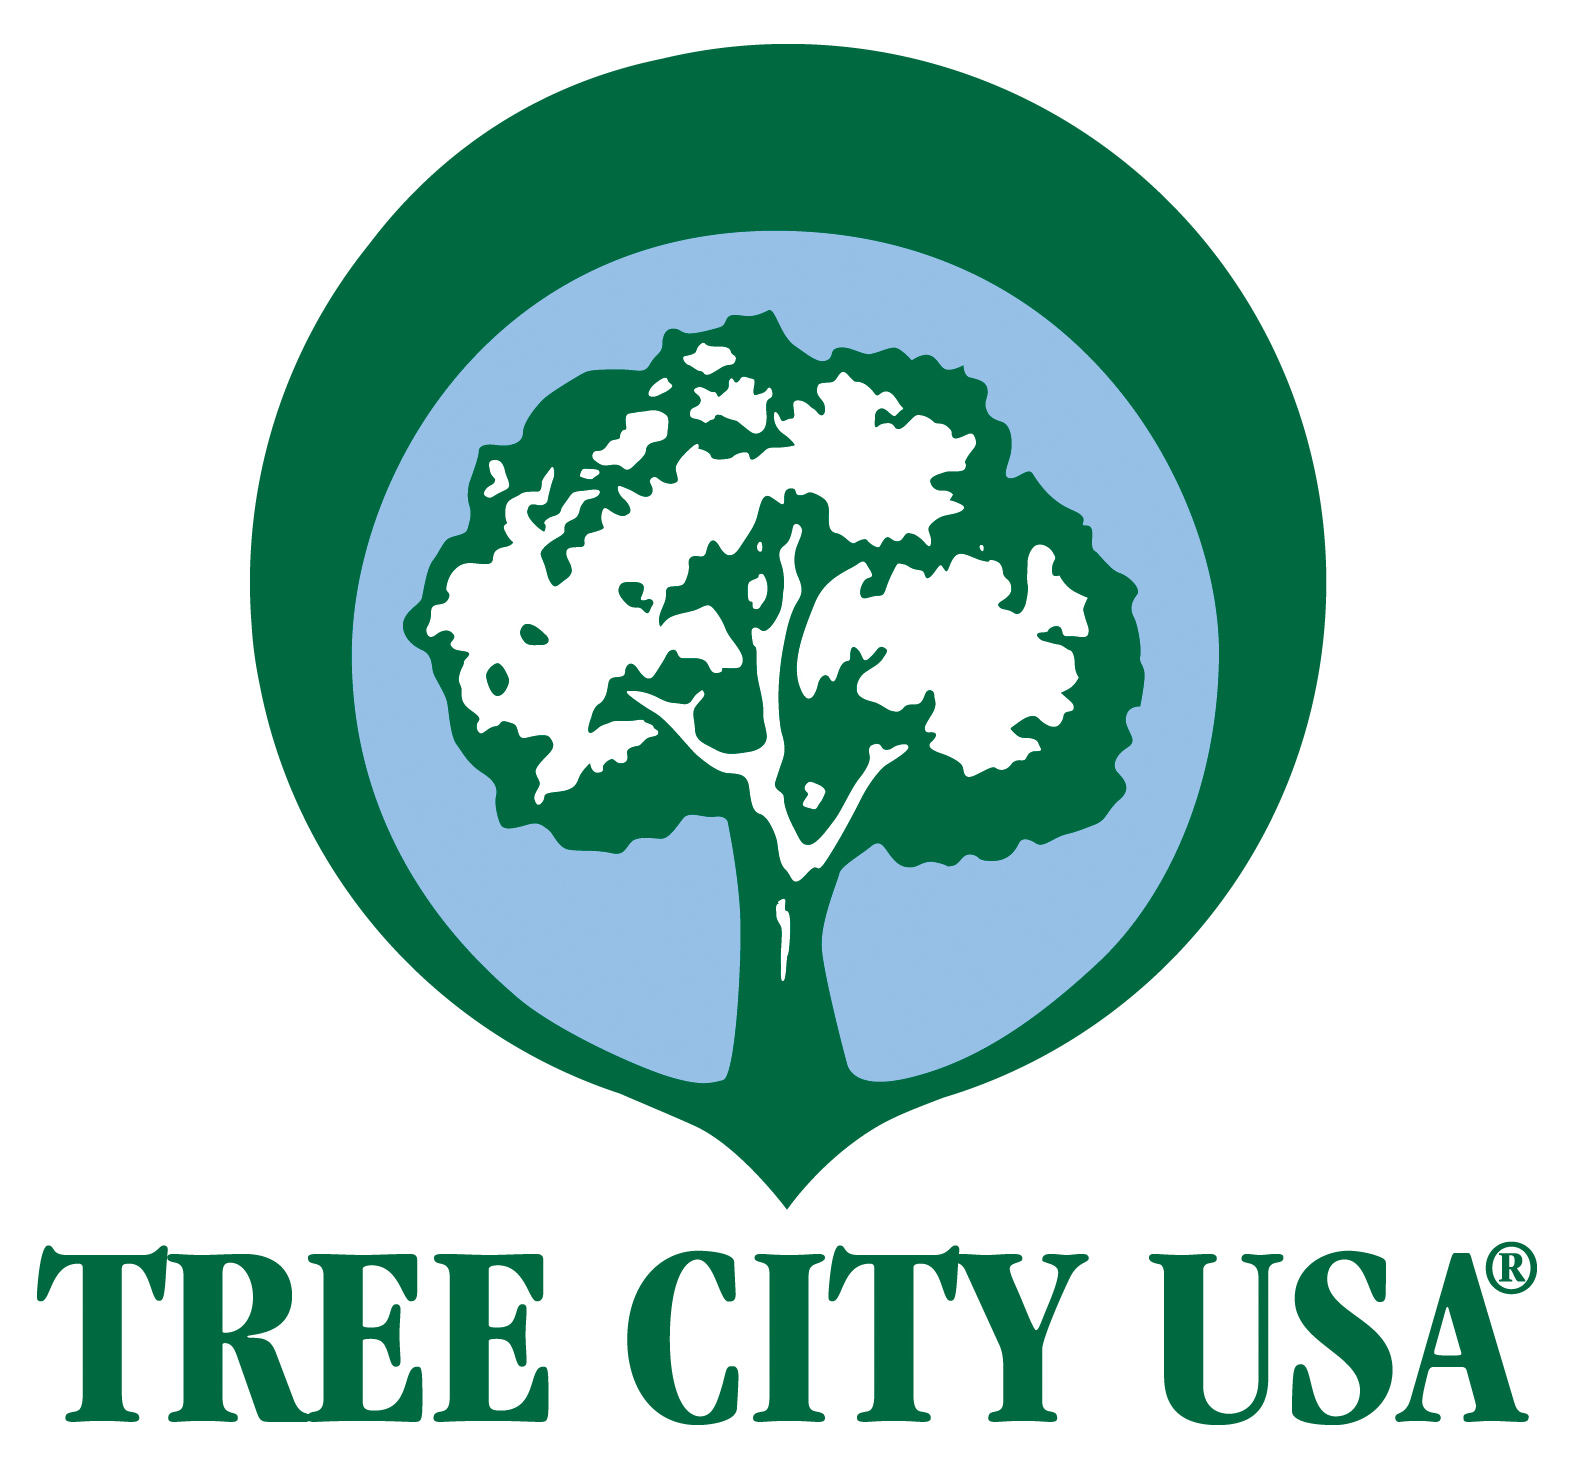 LOGO FOR TREE CITY USA PROGRAM.  GREEN AND BLUE CONCENTRIC CIRCLES WITH A GREEN OUTLINE OF A TREE INSIDE